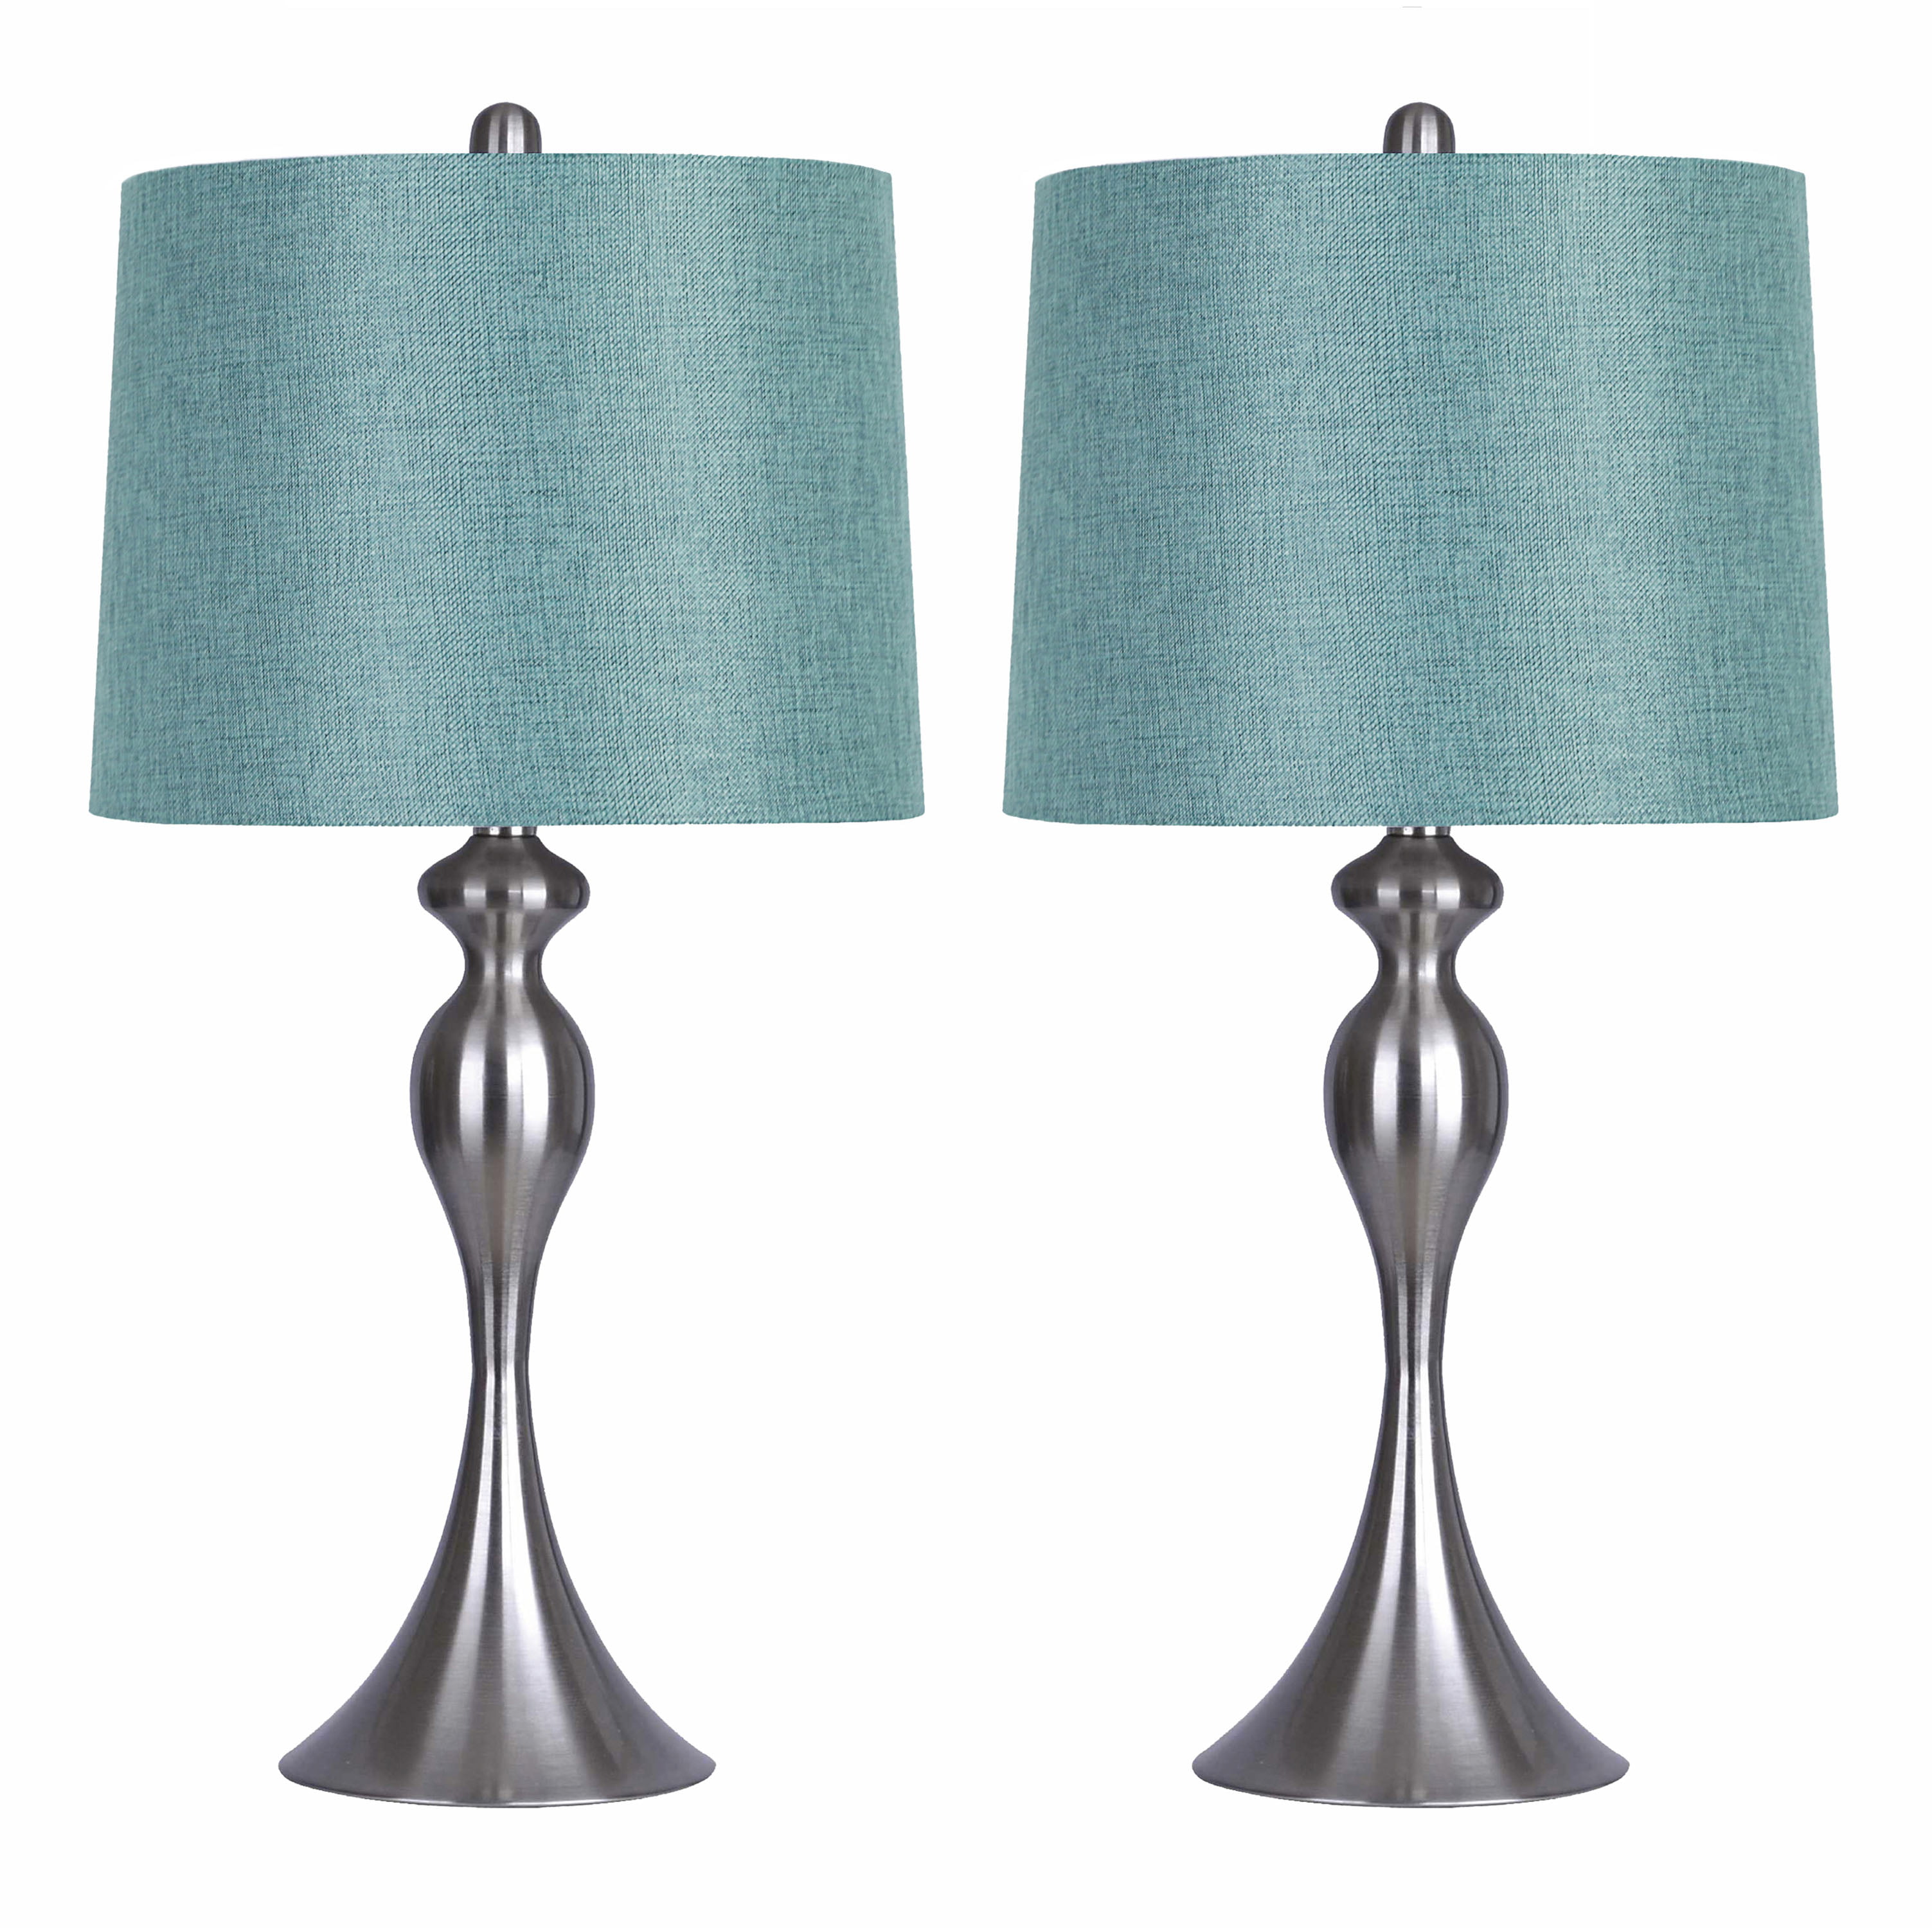 Grandview Gallery Table Lamps With, How Much Is A Table Lamp